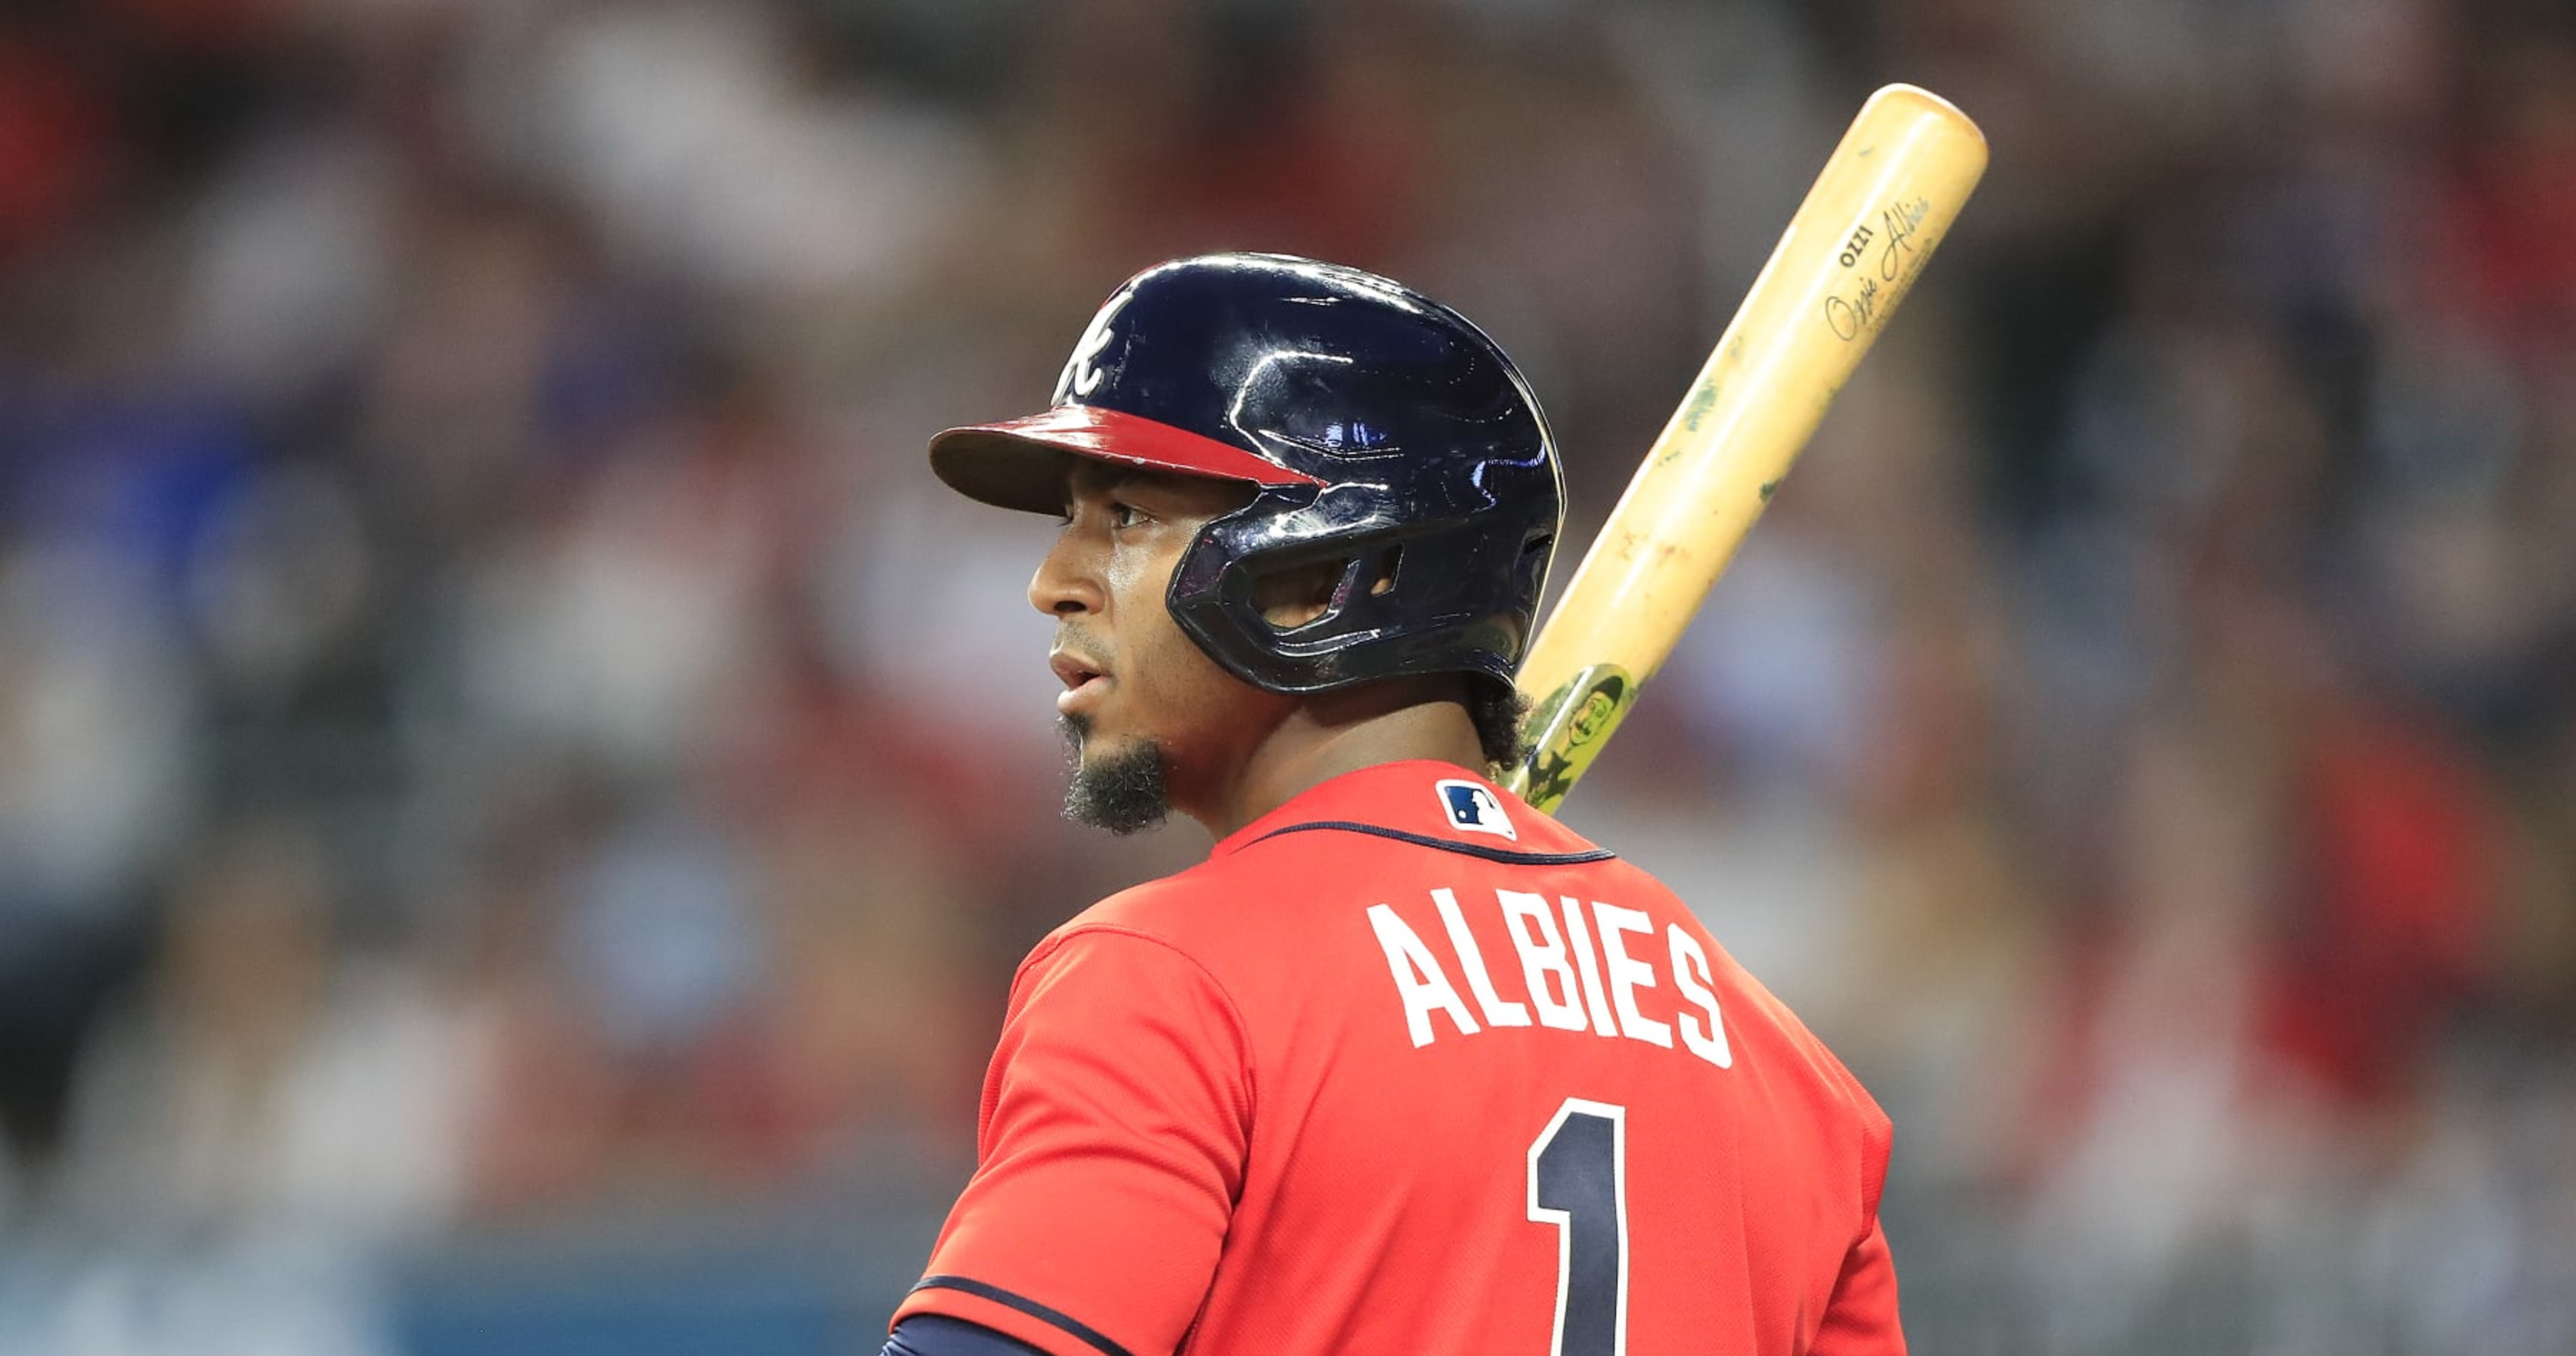 Braves rally past Phillies as Ozzie Albies returns to lineup